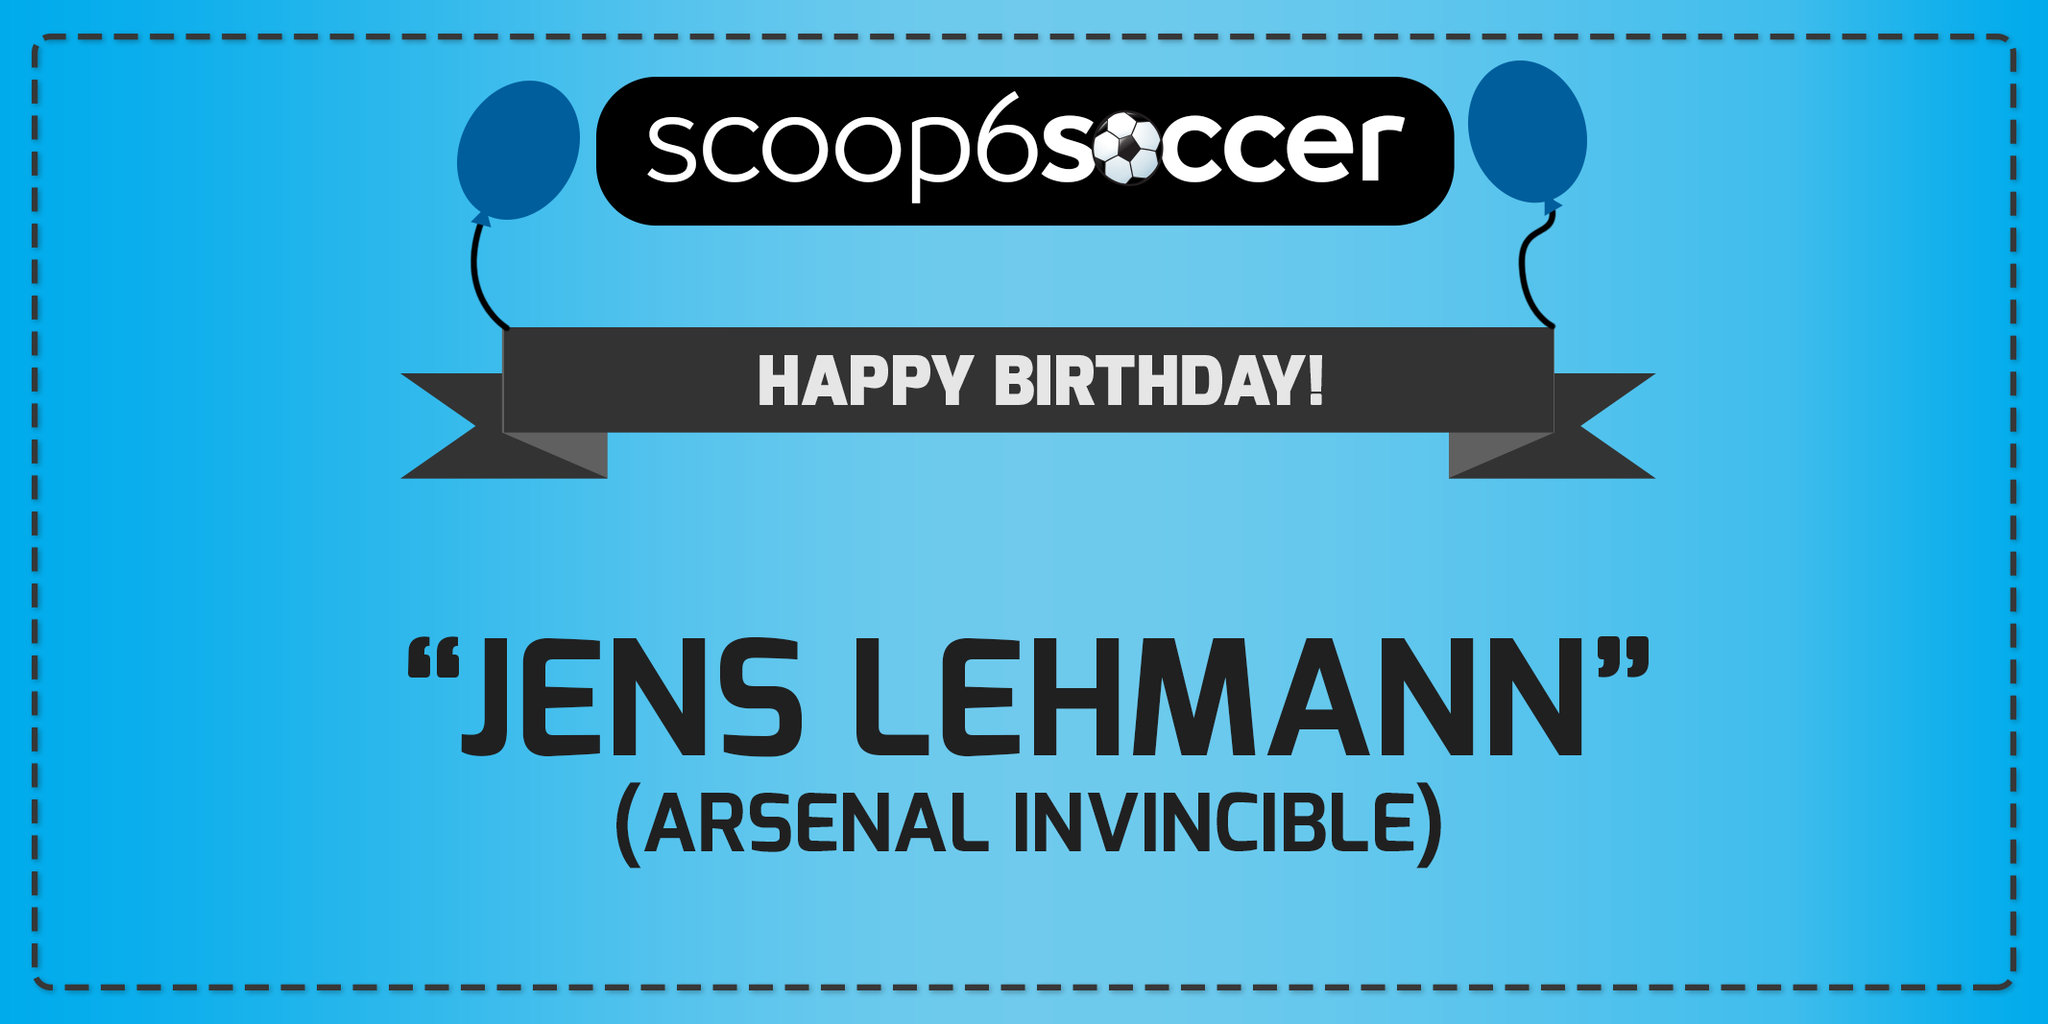 Q: How many league games did Jens Lehmann lose in 2003/04? A: None; Happy 46th birthday! 